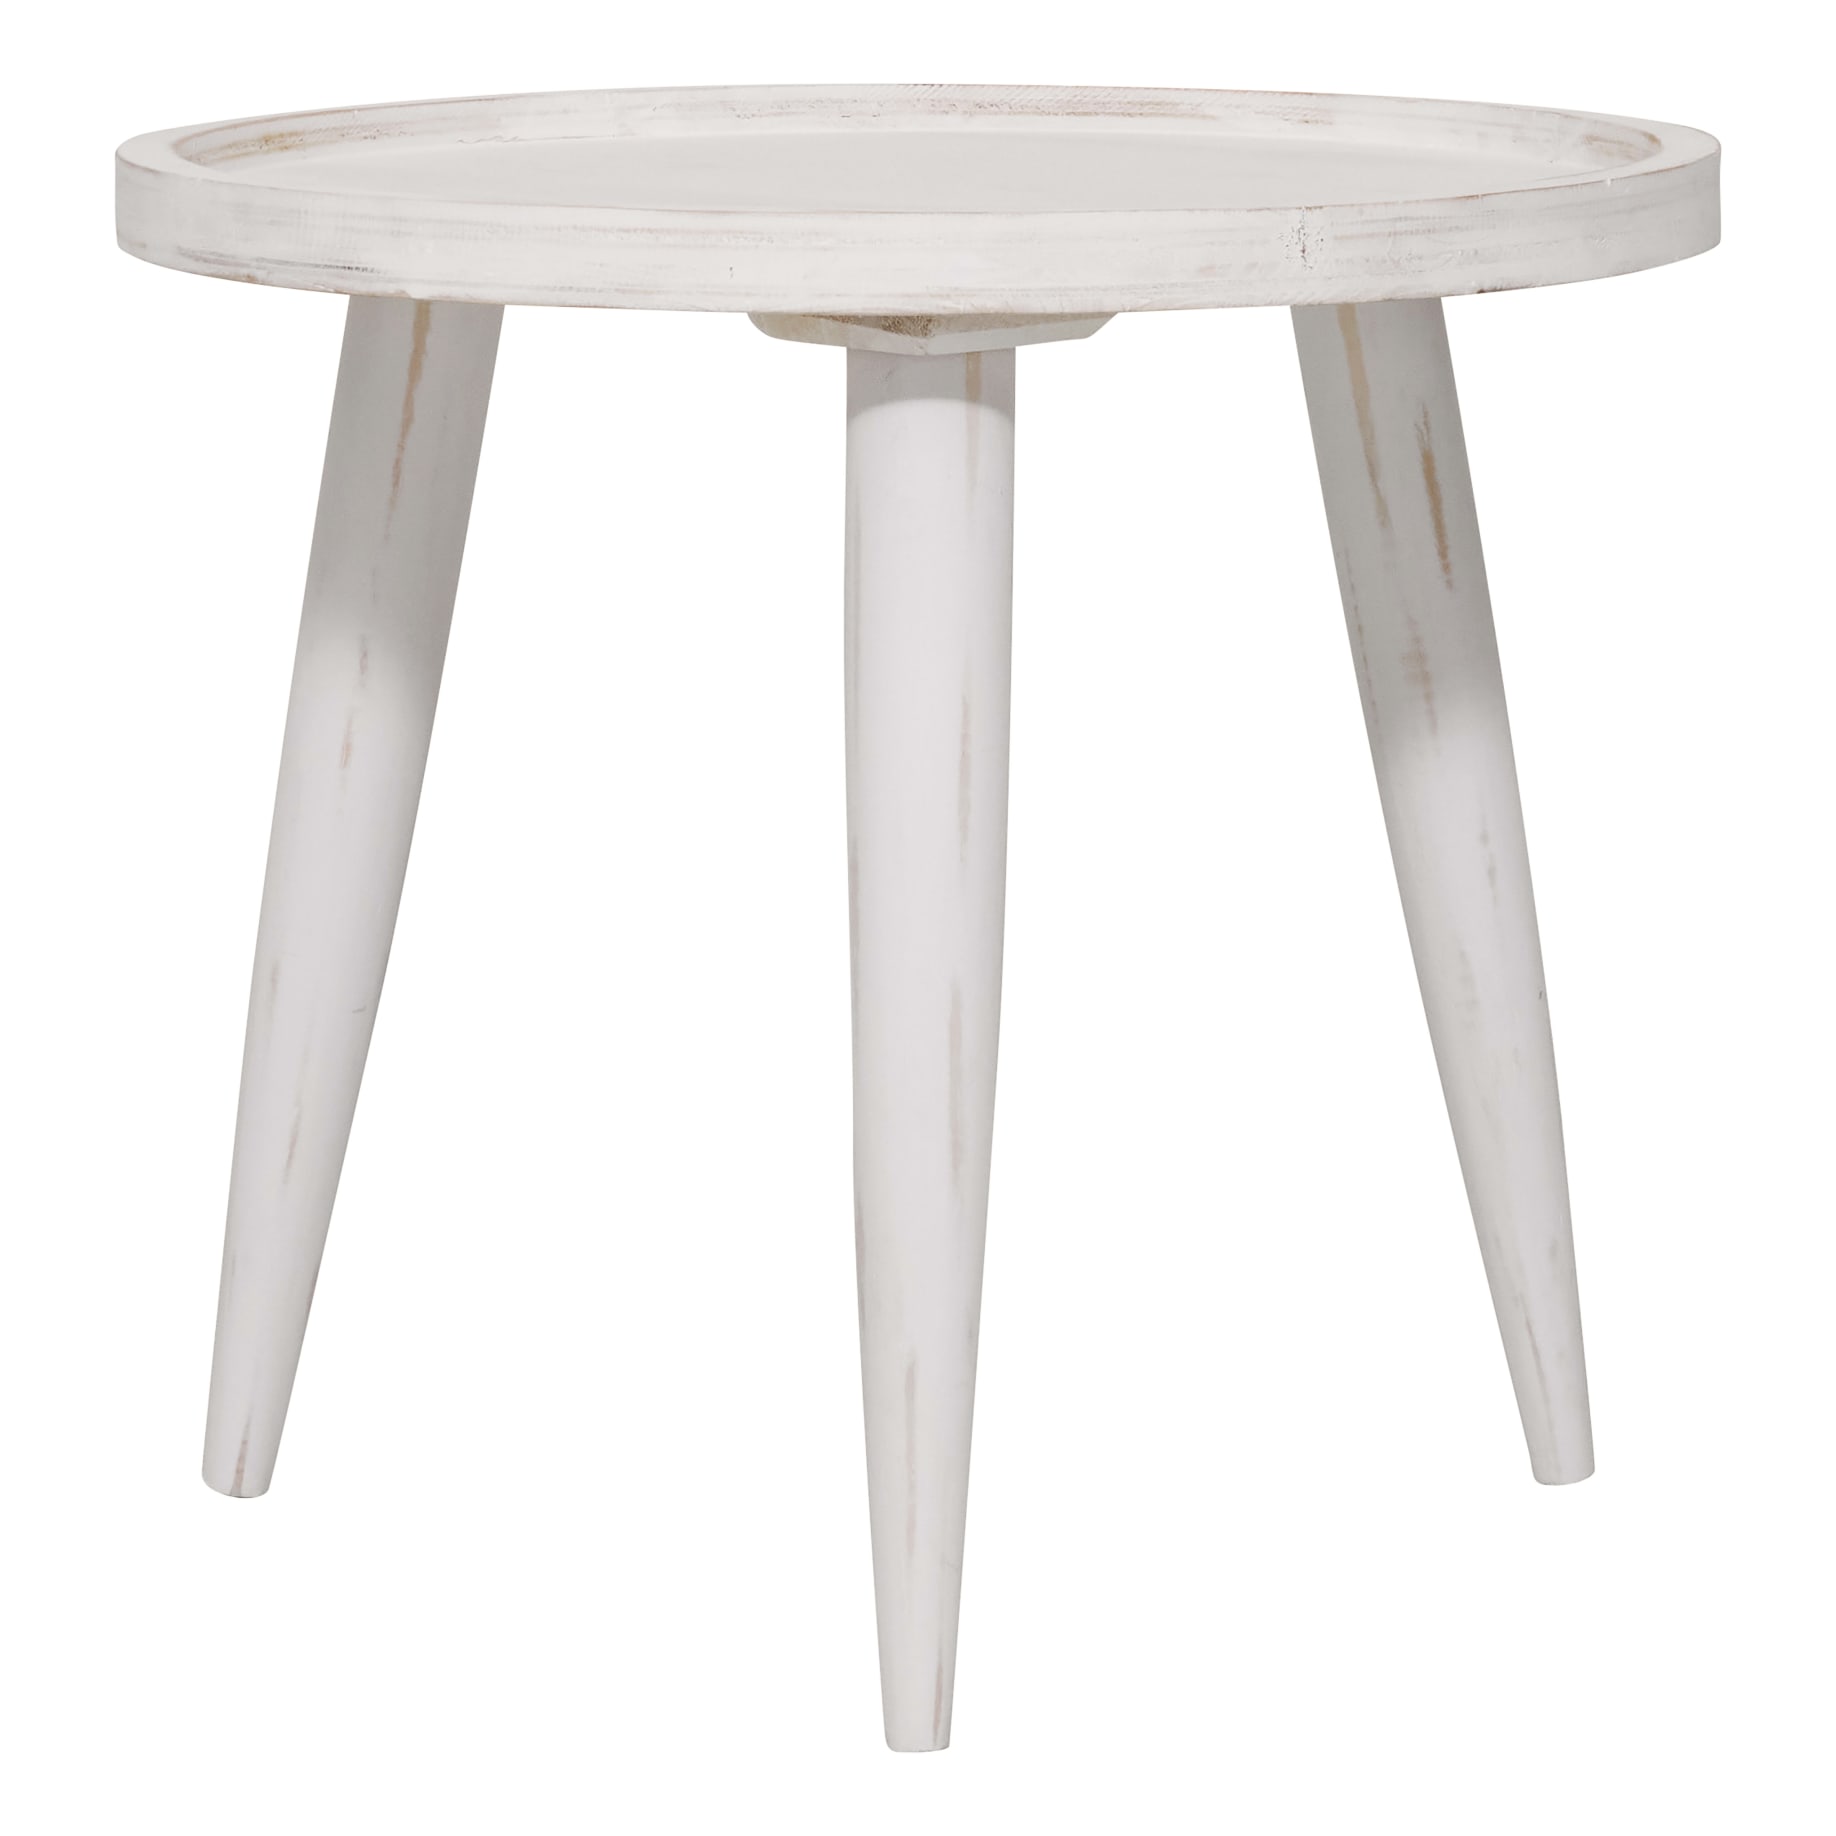 Robert Side Table in White Wash